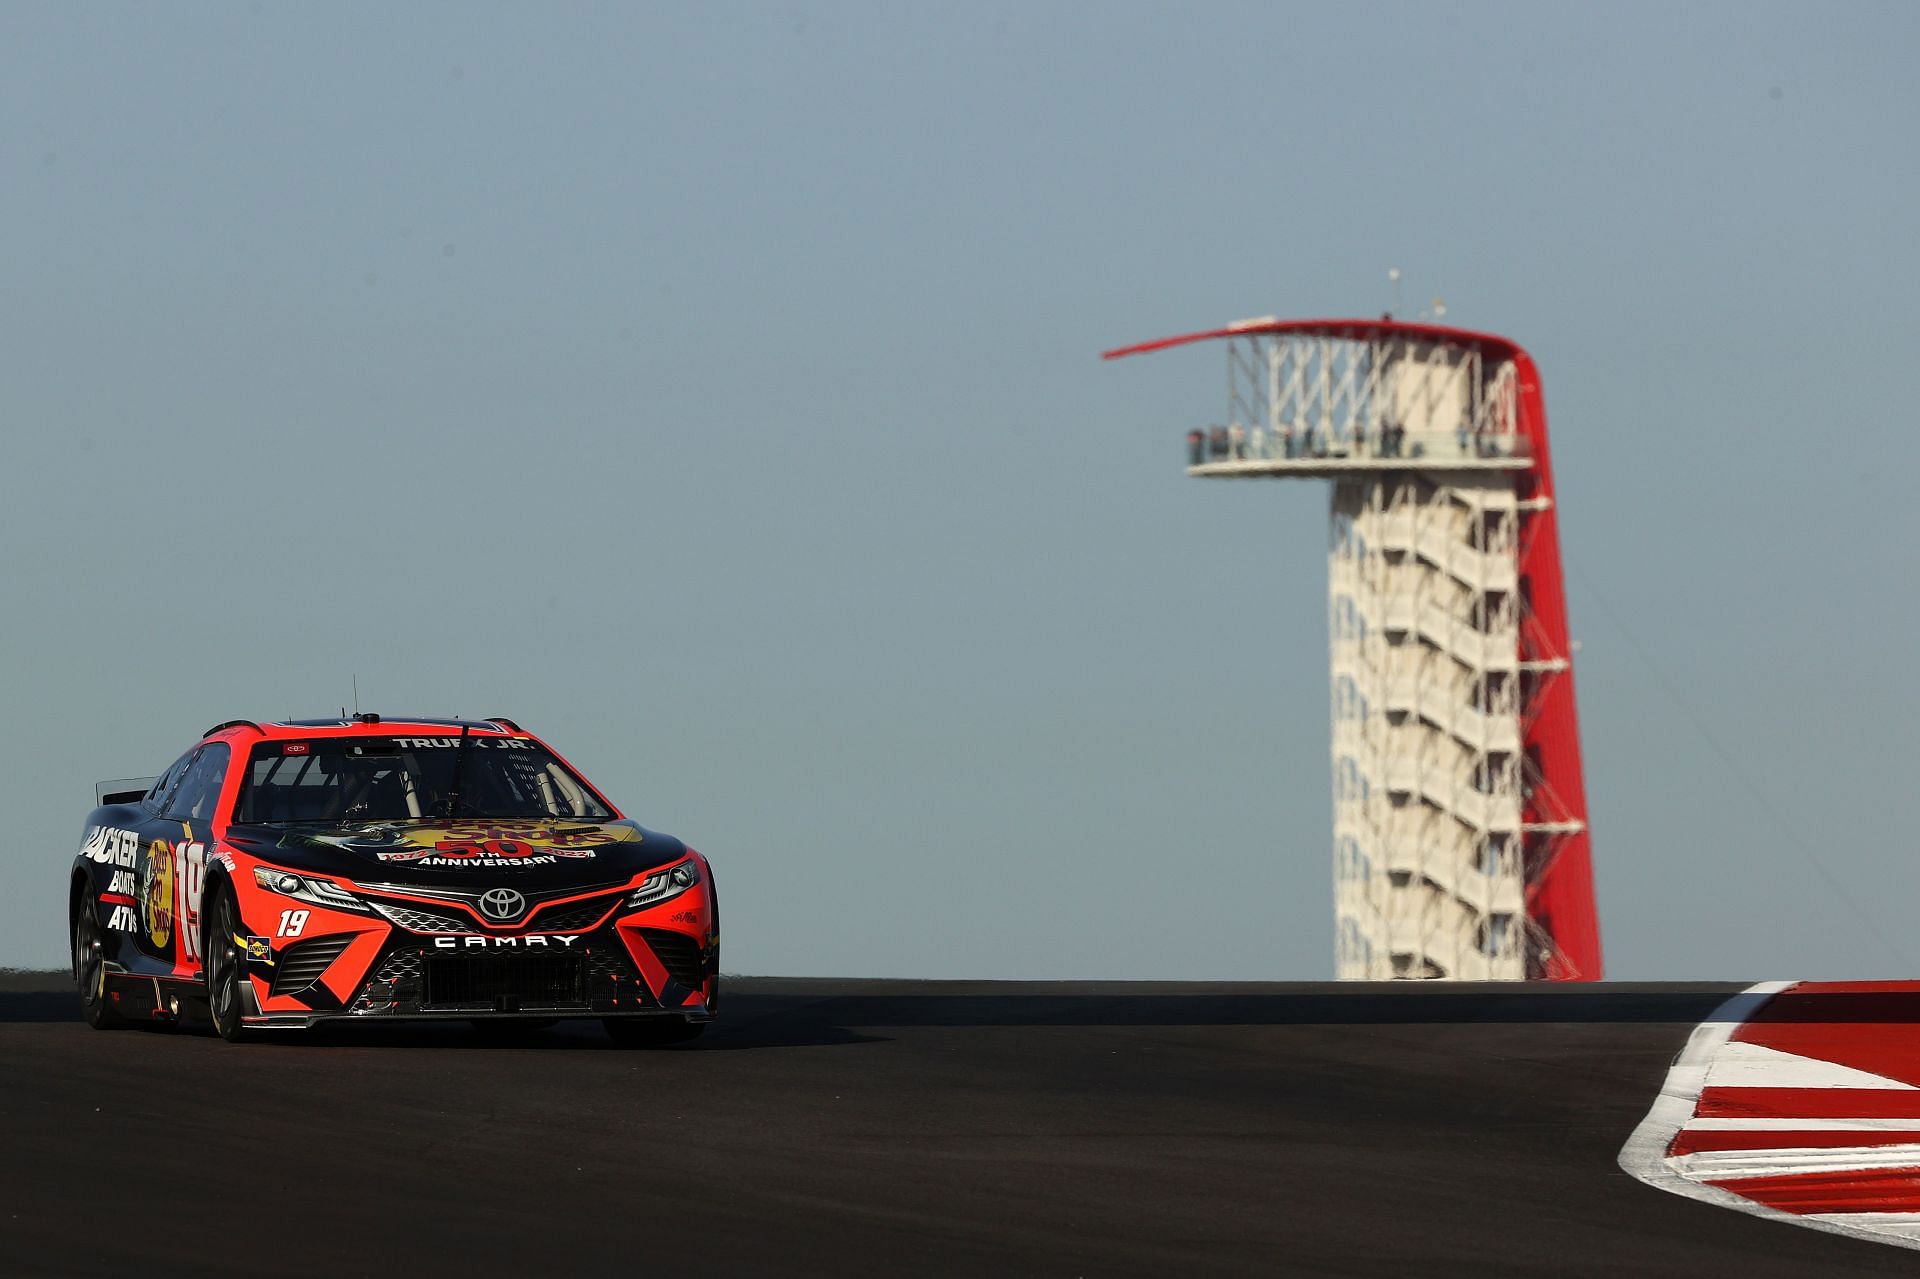 Martin Truex Jr. drives during practice for the NASCAR Cup Series Echopark Automotive Grand Prix at Circuit of The Americas.